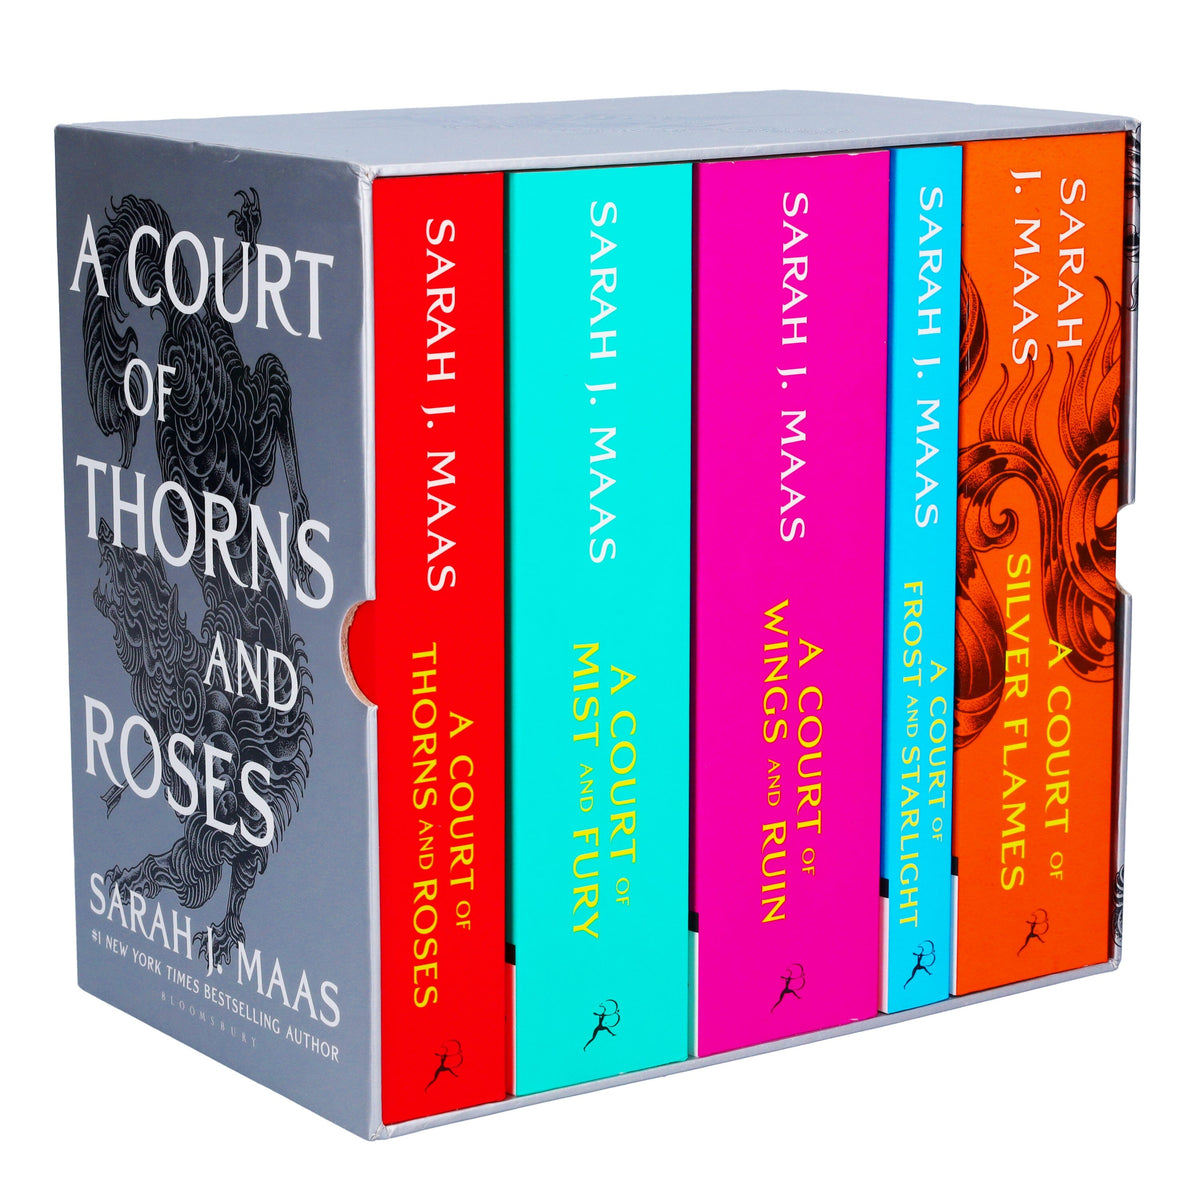 A Court of Thorns and Roses Series by Sarah J. Maas 5 Books Box Set ...